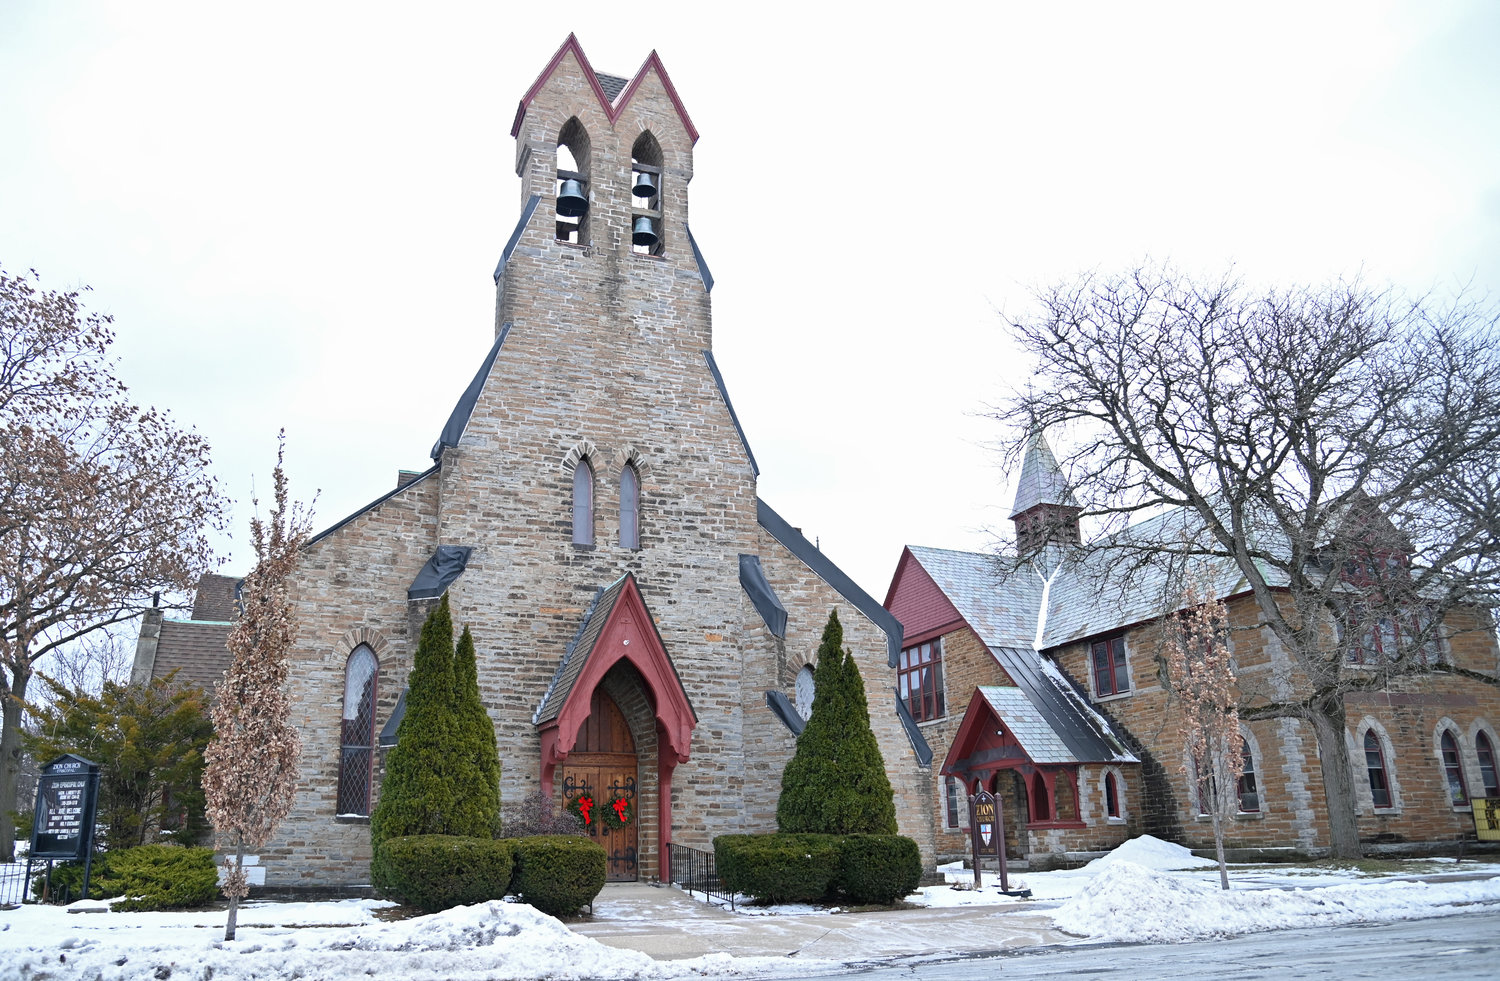 The Zion Episcopal Church, at 140 W. Liberty St. in Rome, is shown on Tuesday, Dec. 27. The church has received a $17,000 grant from the Rome Community Foundation, one of 13 non-profit entities in the city to receive funding from the foundation during the last quarter of 2022.